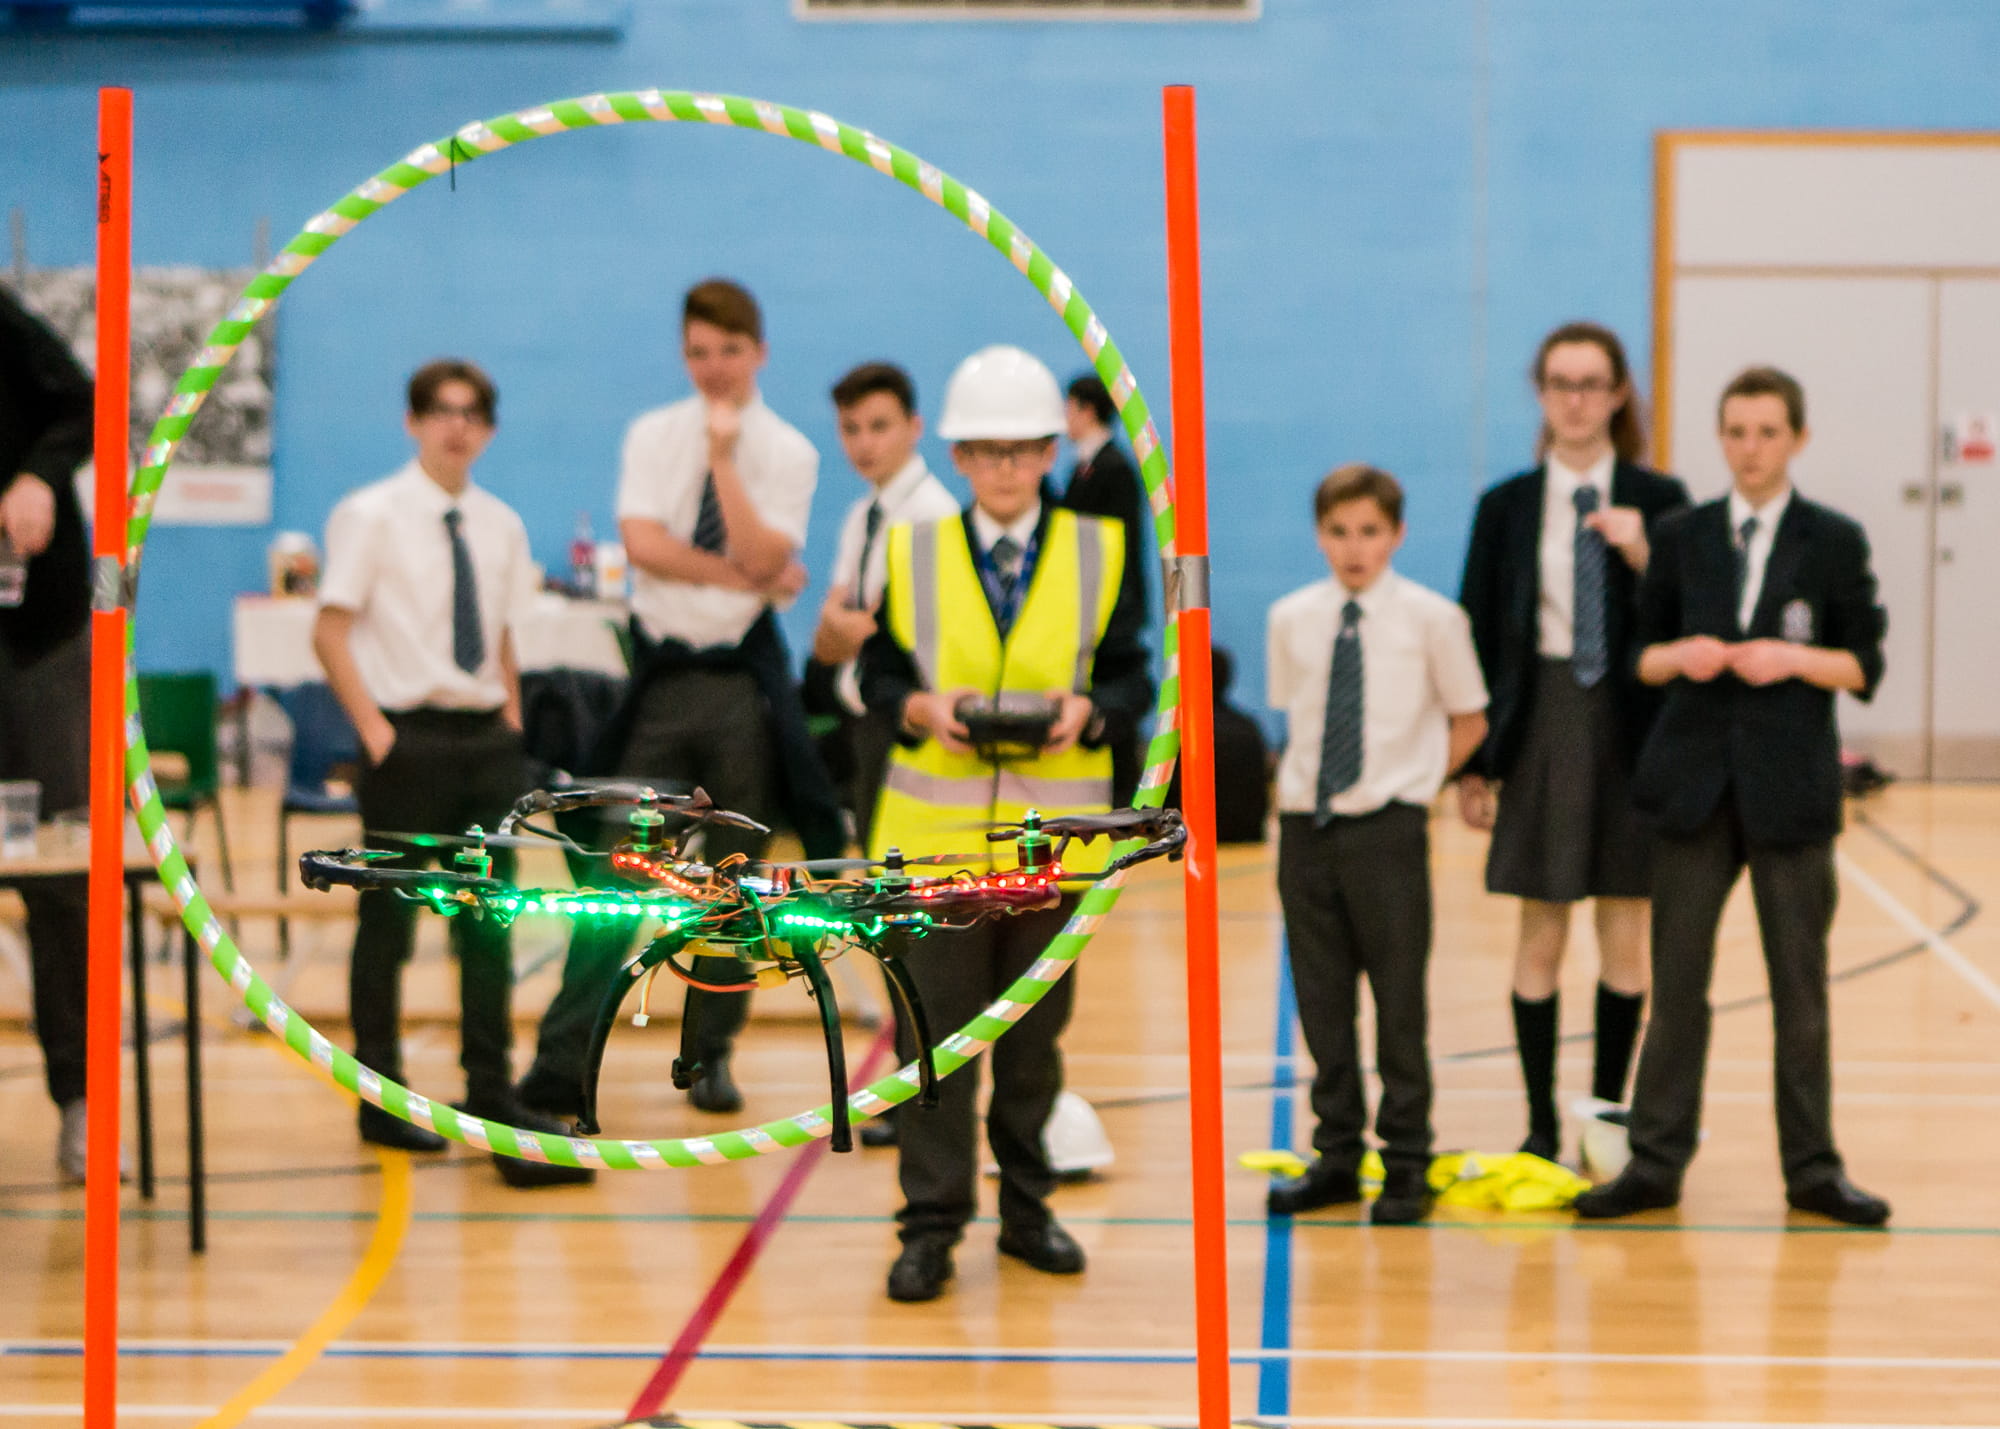 A quadcopter flies through an obstacle at the 2017 Raytheon UK Quadcopter Challenge regional competition. The company hosts the event to promote the interest of young people in science, technology, engineering and math.